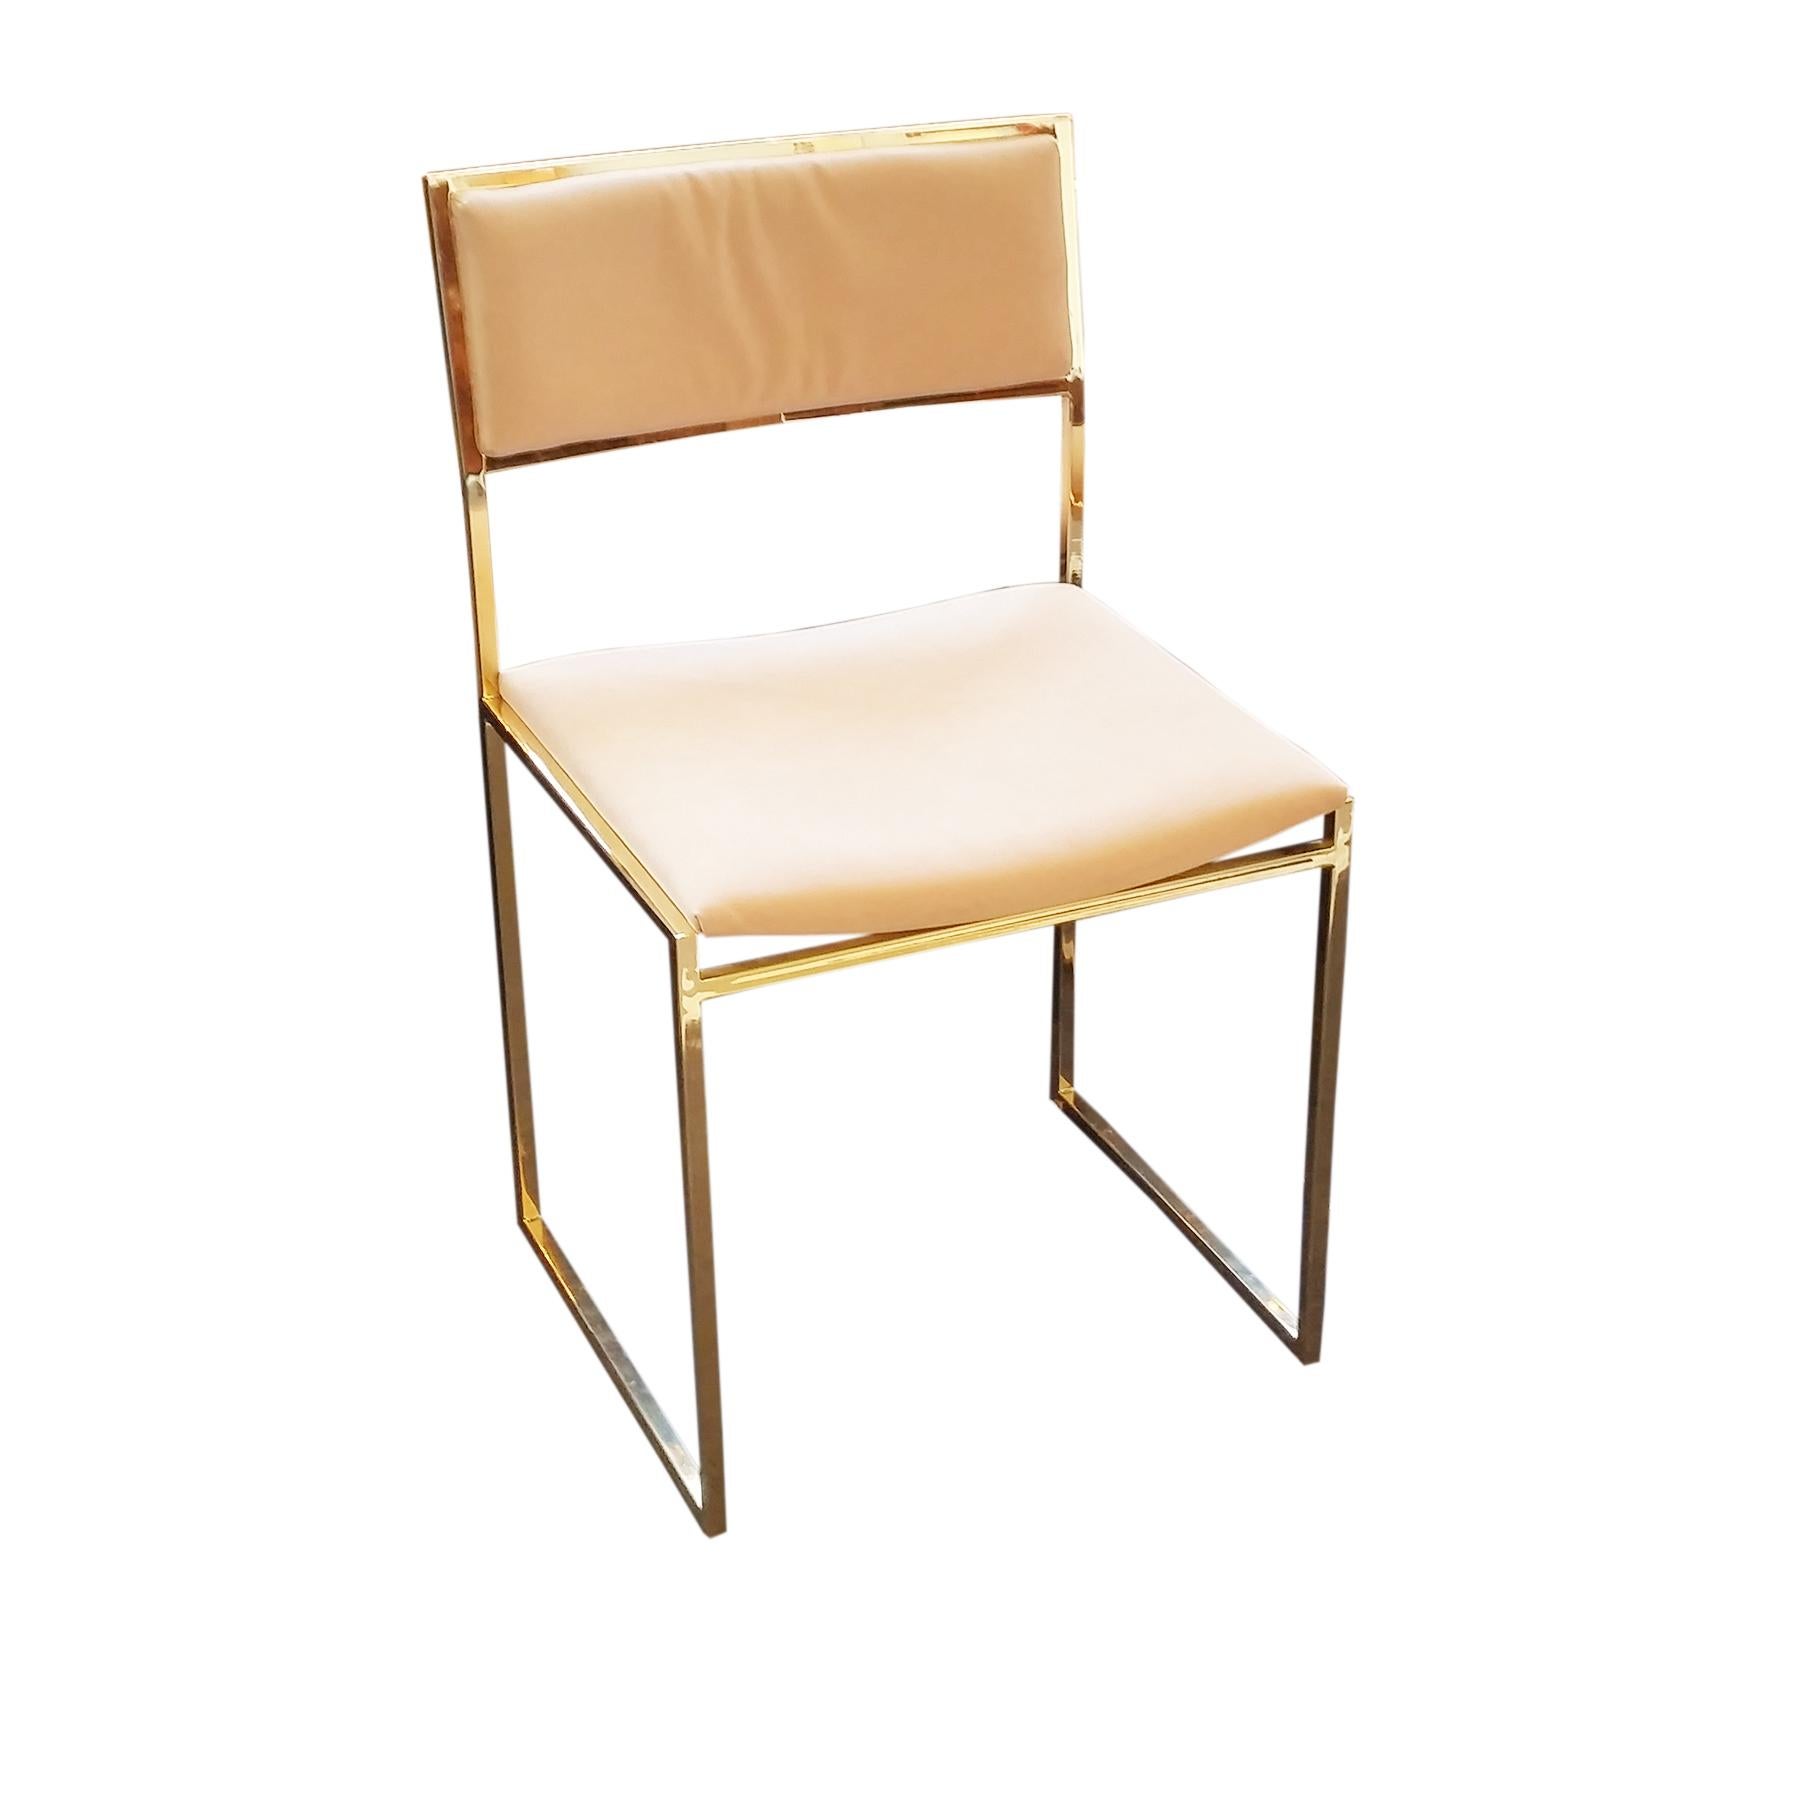 Eight dining chairs gold and puce, designed by Willy Rizzo.
Elegant design, filigran and very light.
The chairs have a new upholstery in puce colour, but this can be changed if desired, for the regarding cost.
Each chair is signed in white by Willy